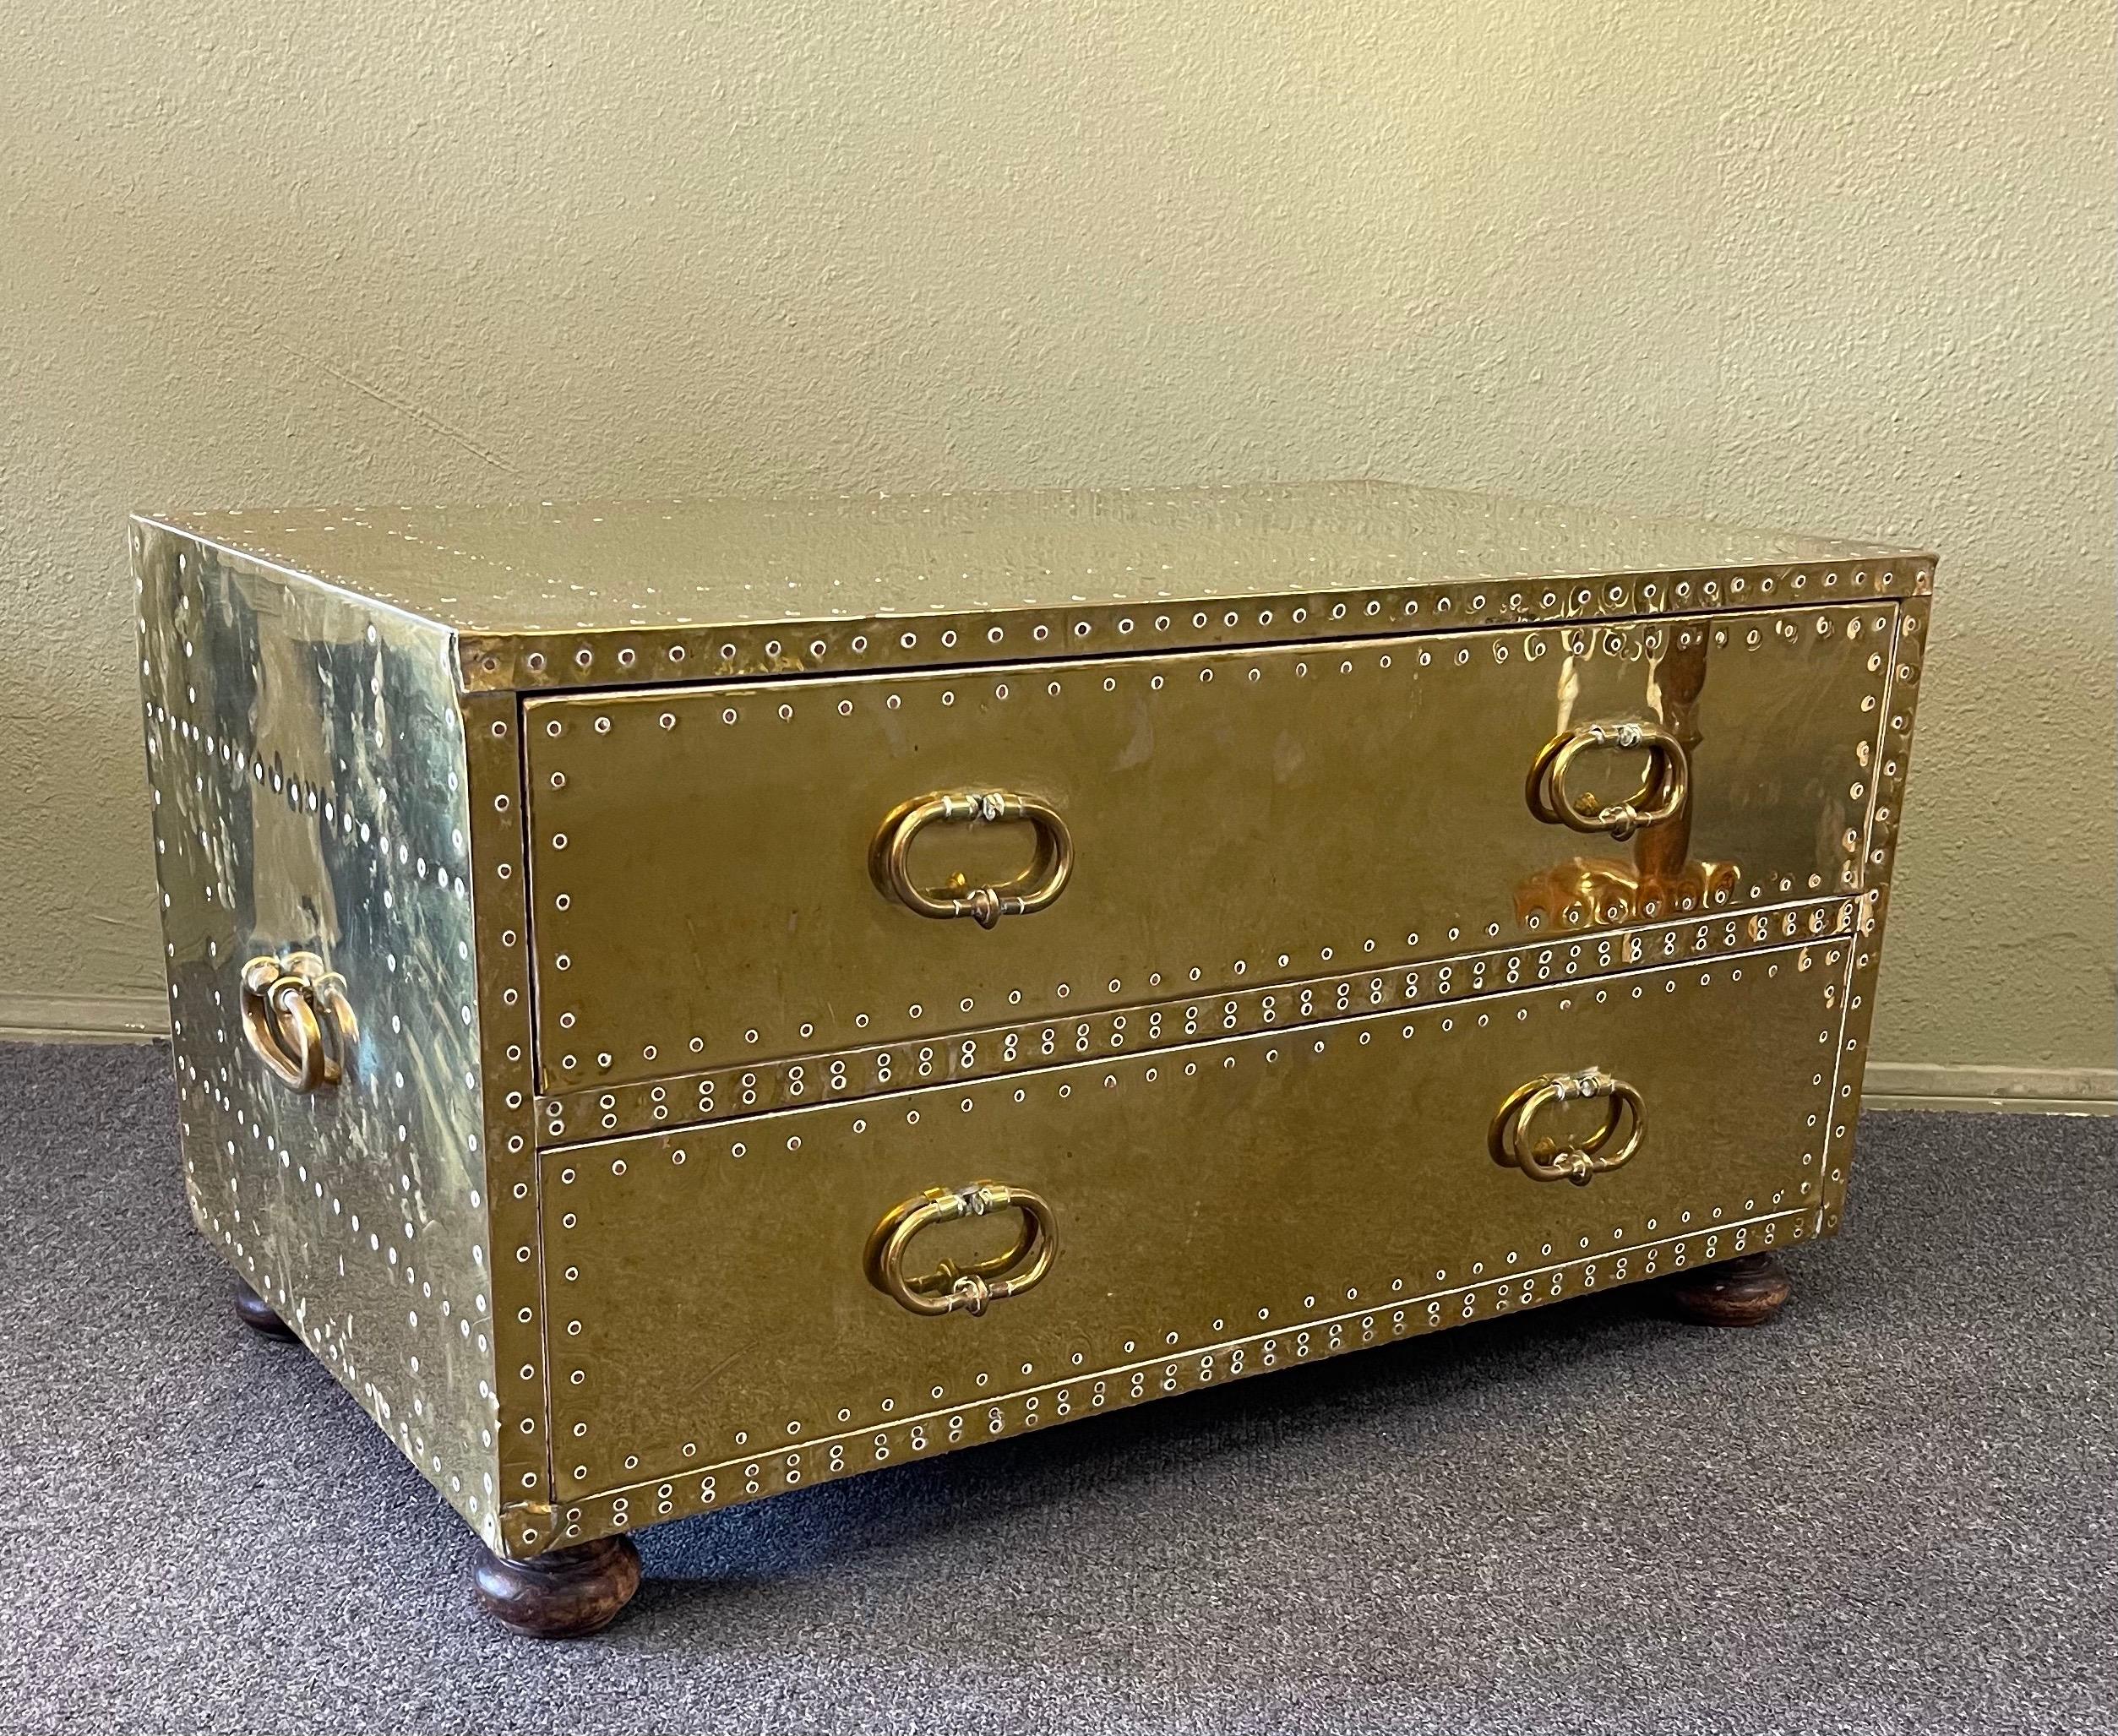 A very nice Hollywood Regency brass clad two drawer chest by Sarreid LTD of Spain, circa 1970s. The chest is constructed of solid wood with dovetailed drawers covered in brass clad with hammered brass nails and wood bun feet. It is in good vintage